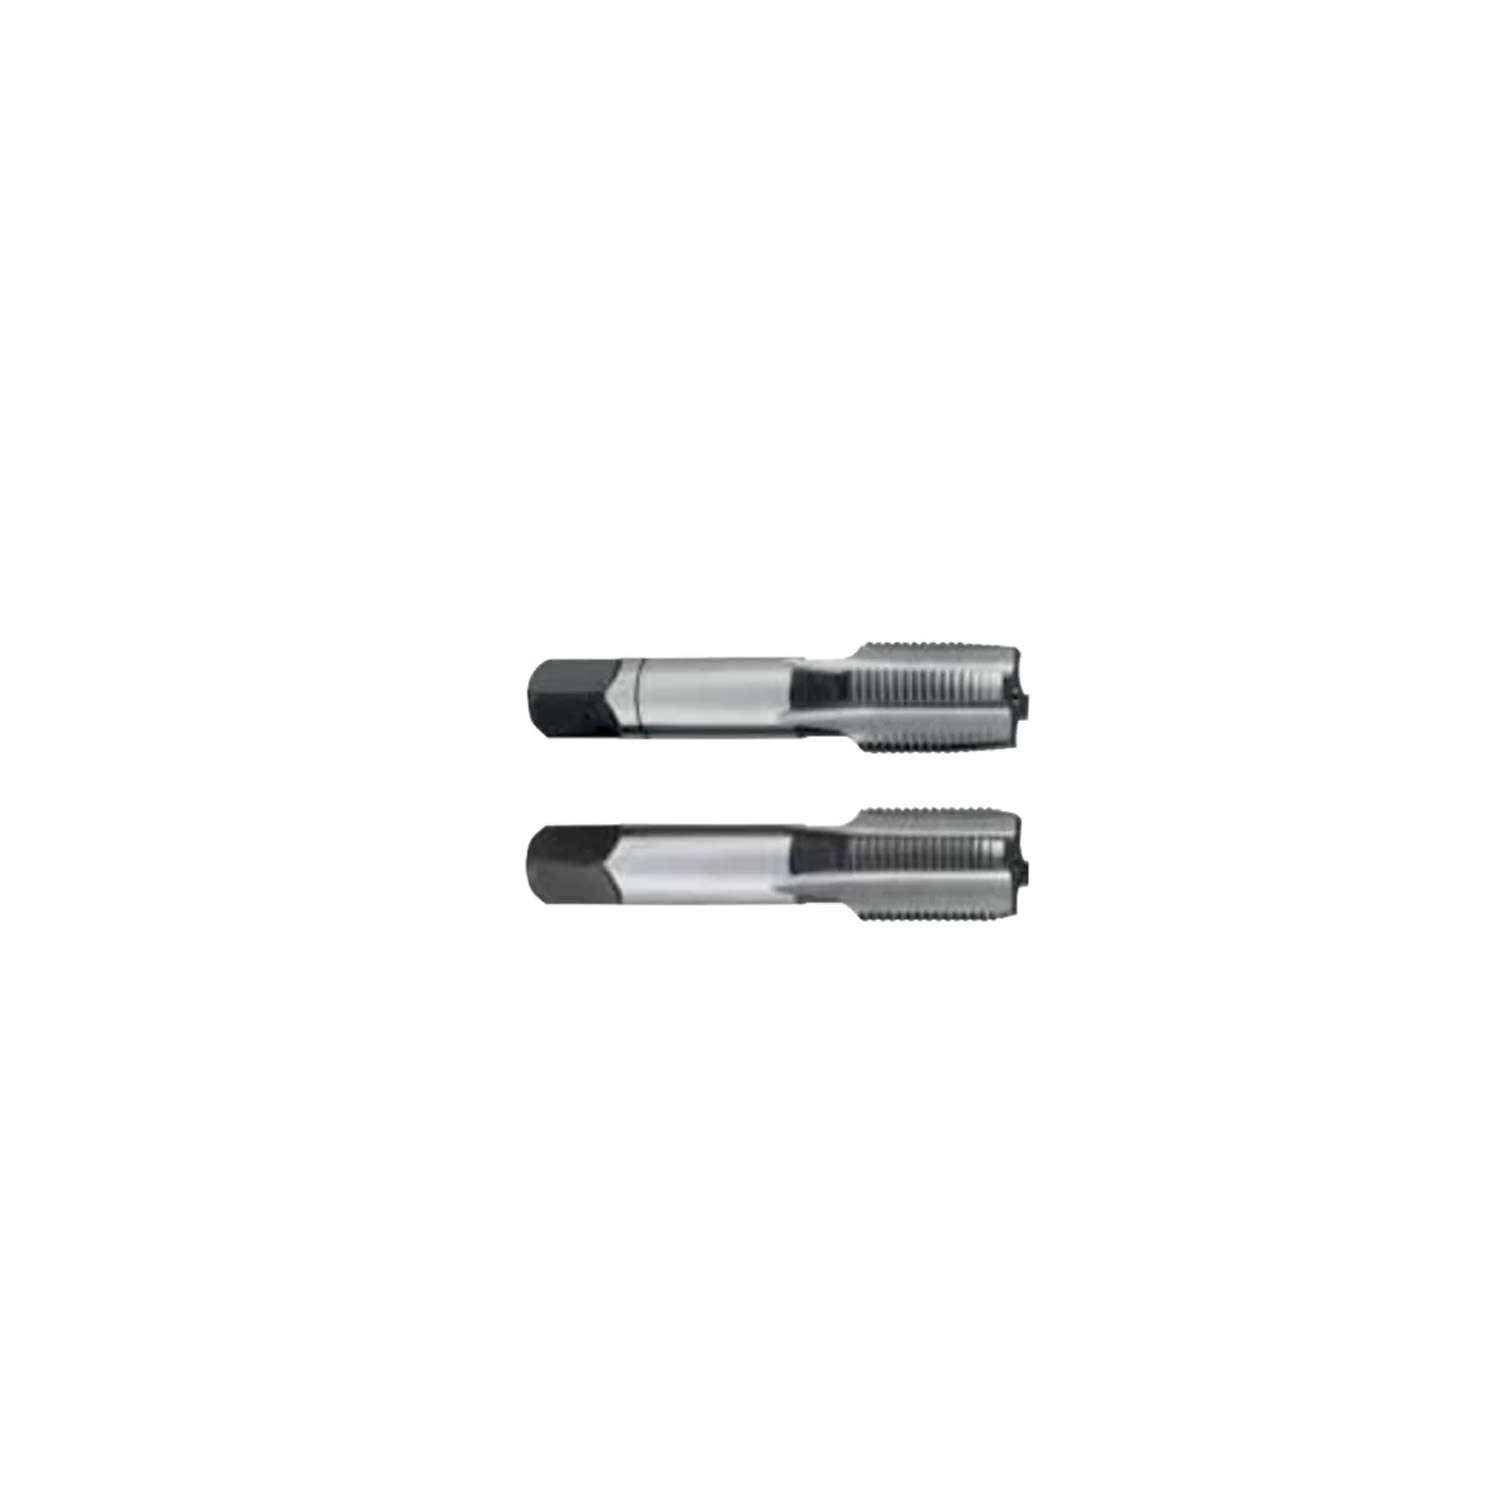 Series of 2 hand taps for general applications DIN 5157 1/2 - ILIX